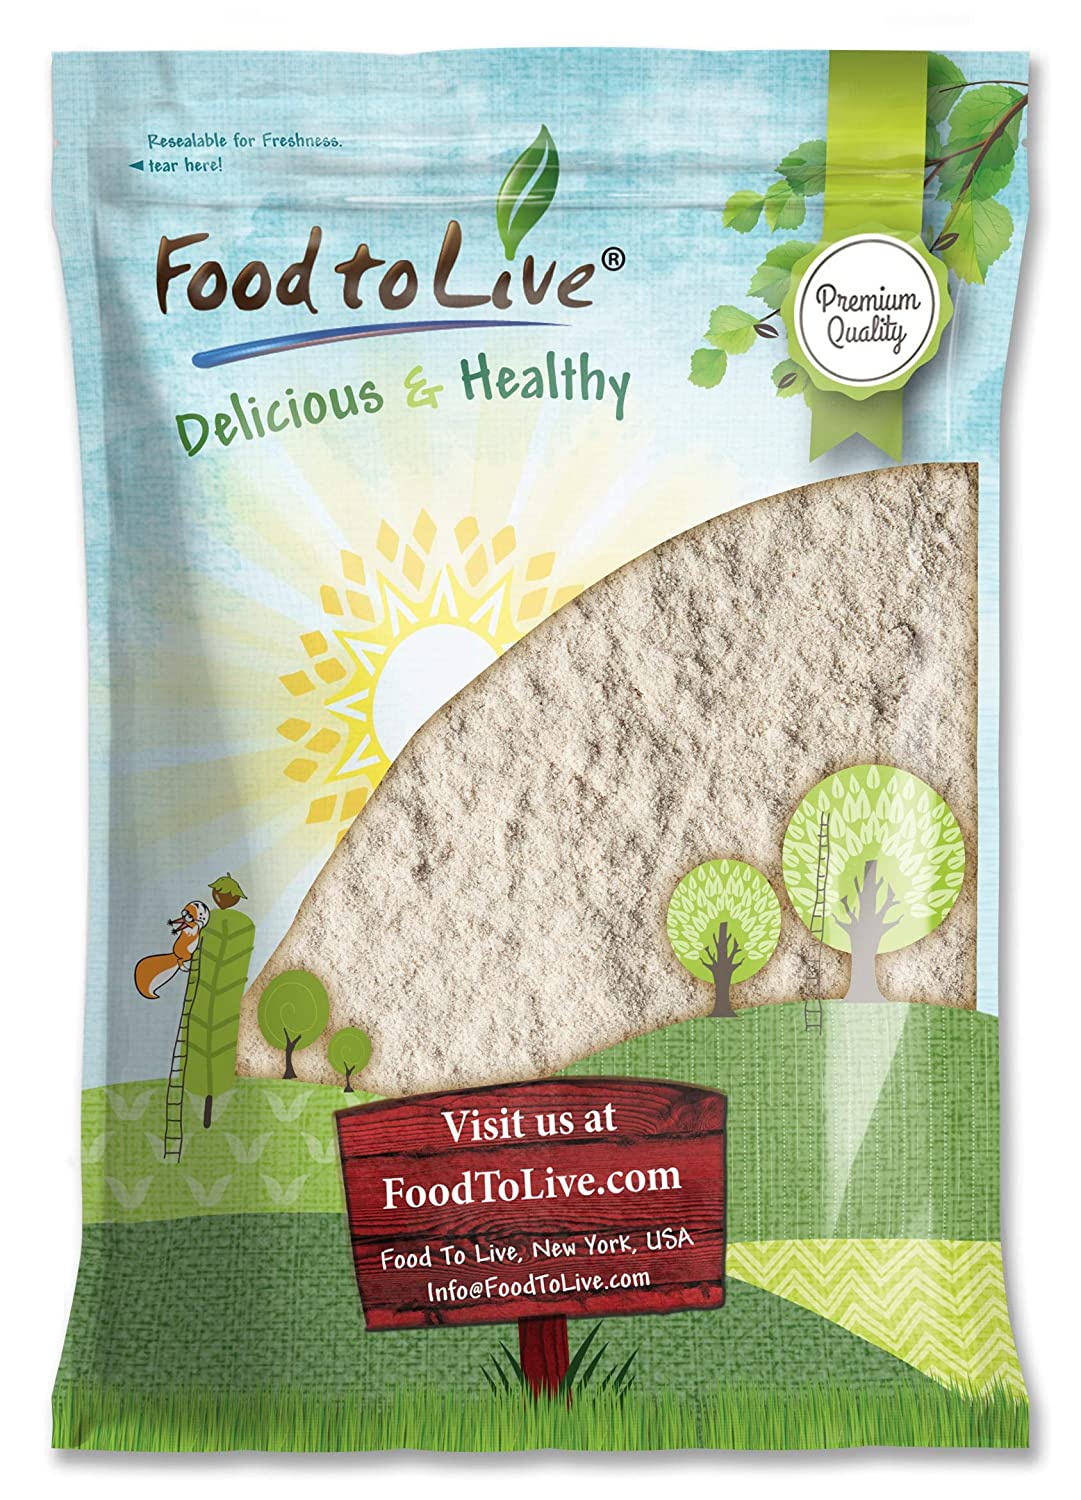 Unbleached White Fine Pastry Flour — Non-GMO Verified, Stone Ground, Finely Milled and Sifted, Unbromated, Kosher, Vegan, Bulk - by Food to Live